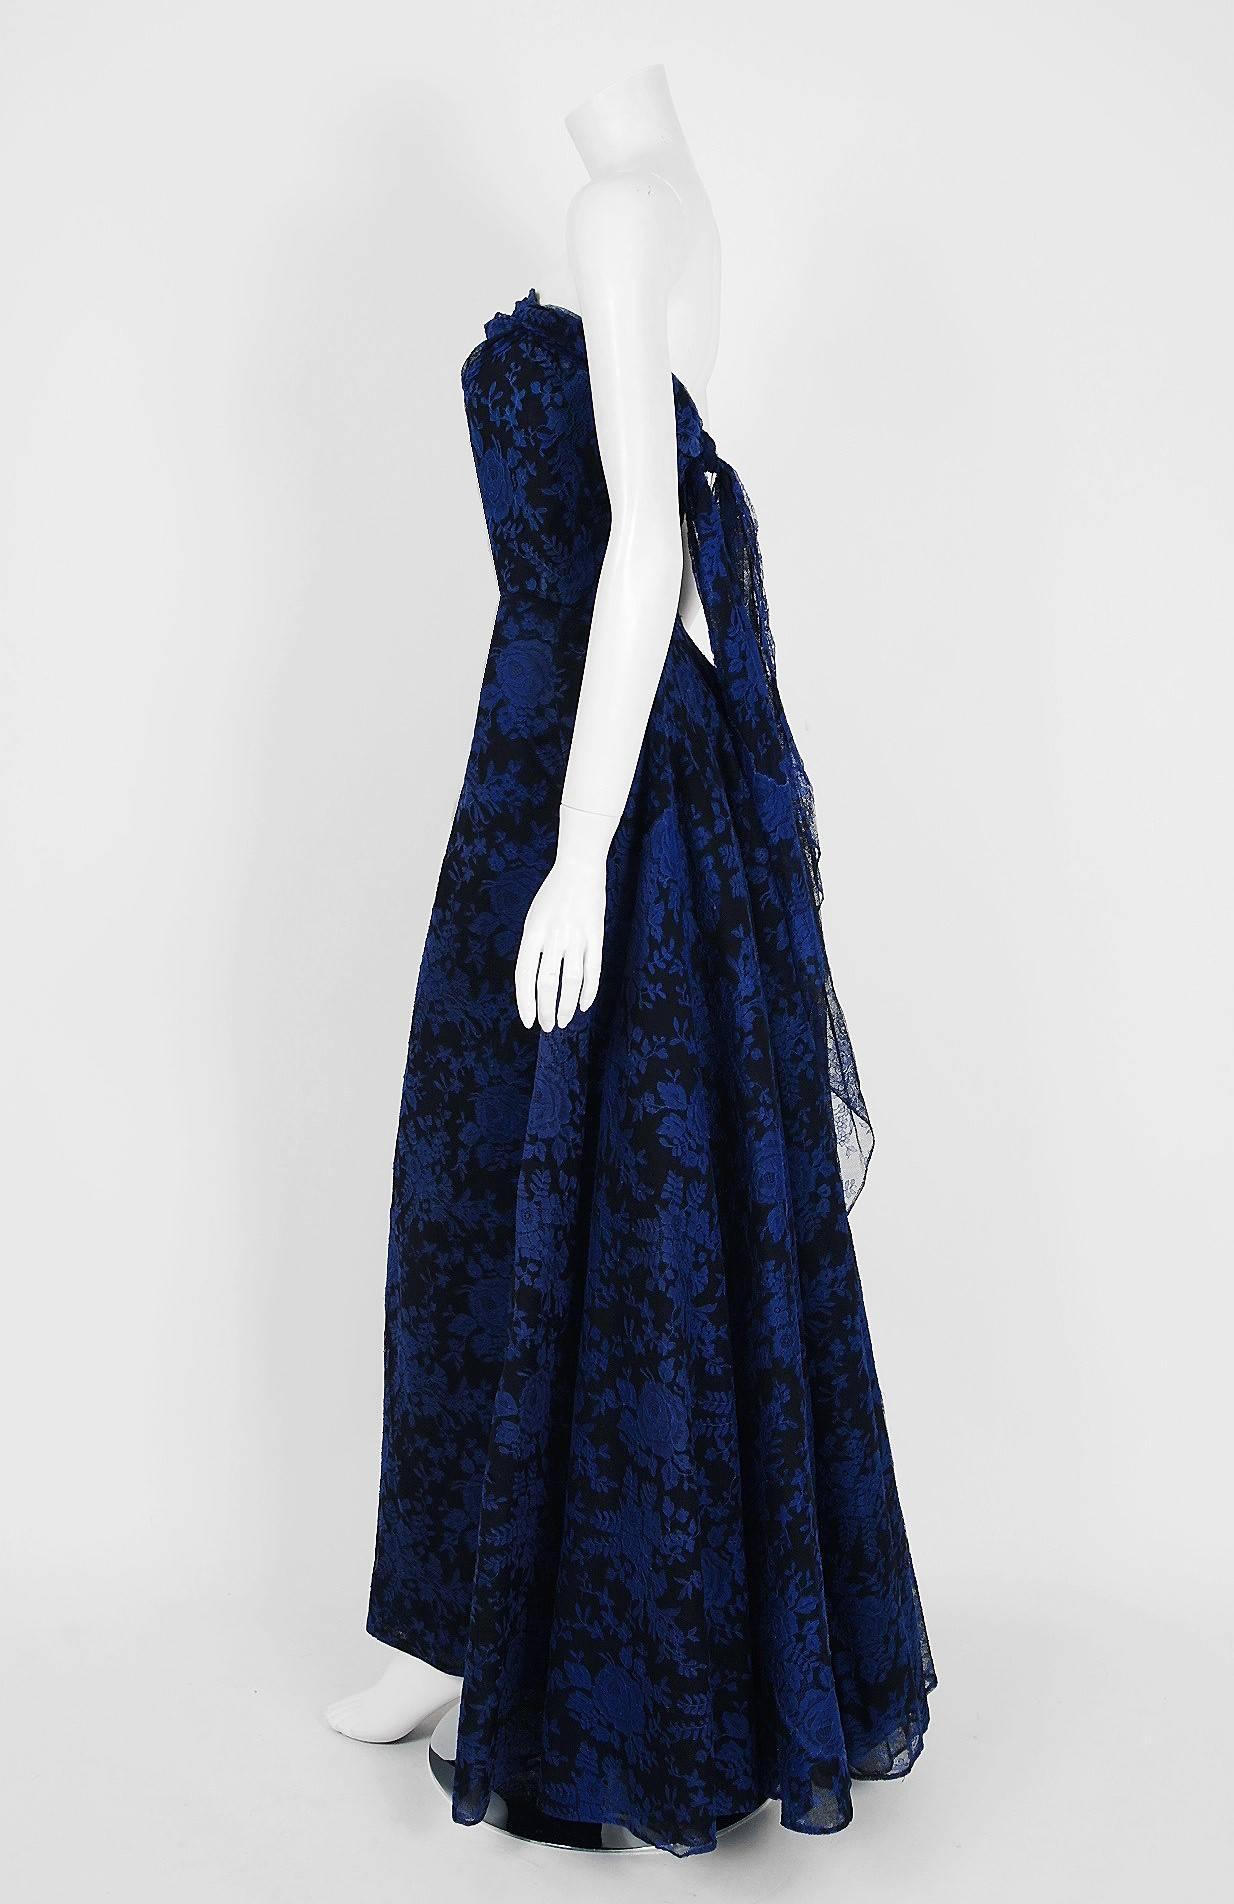 Breathtaking sapphire-blue roses floral chantilly-lace gown created by Italian designer Fernando Sarmi when he was head designer for Elizabeth Arden in the 1950's. Ferdinando Sarmi expressed interest in fashion during his youth but was discouraged